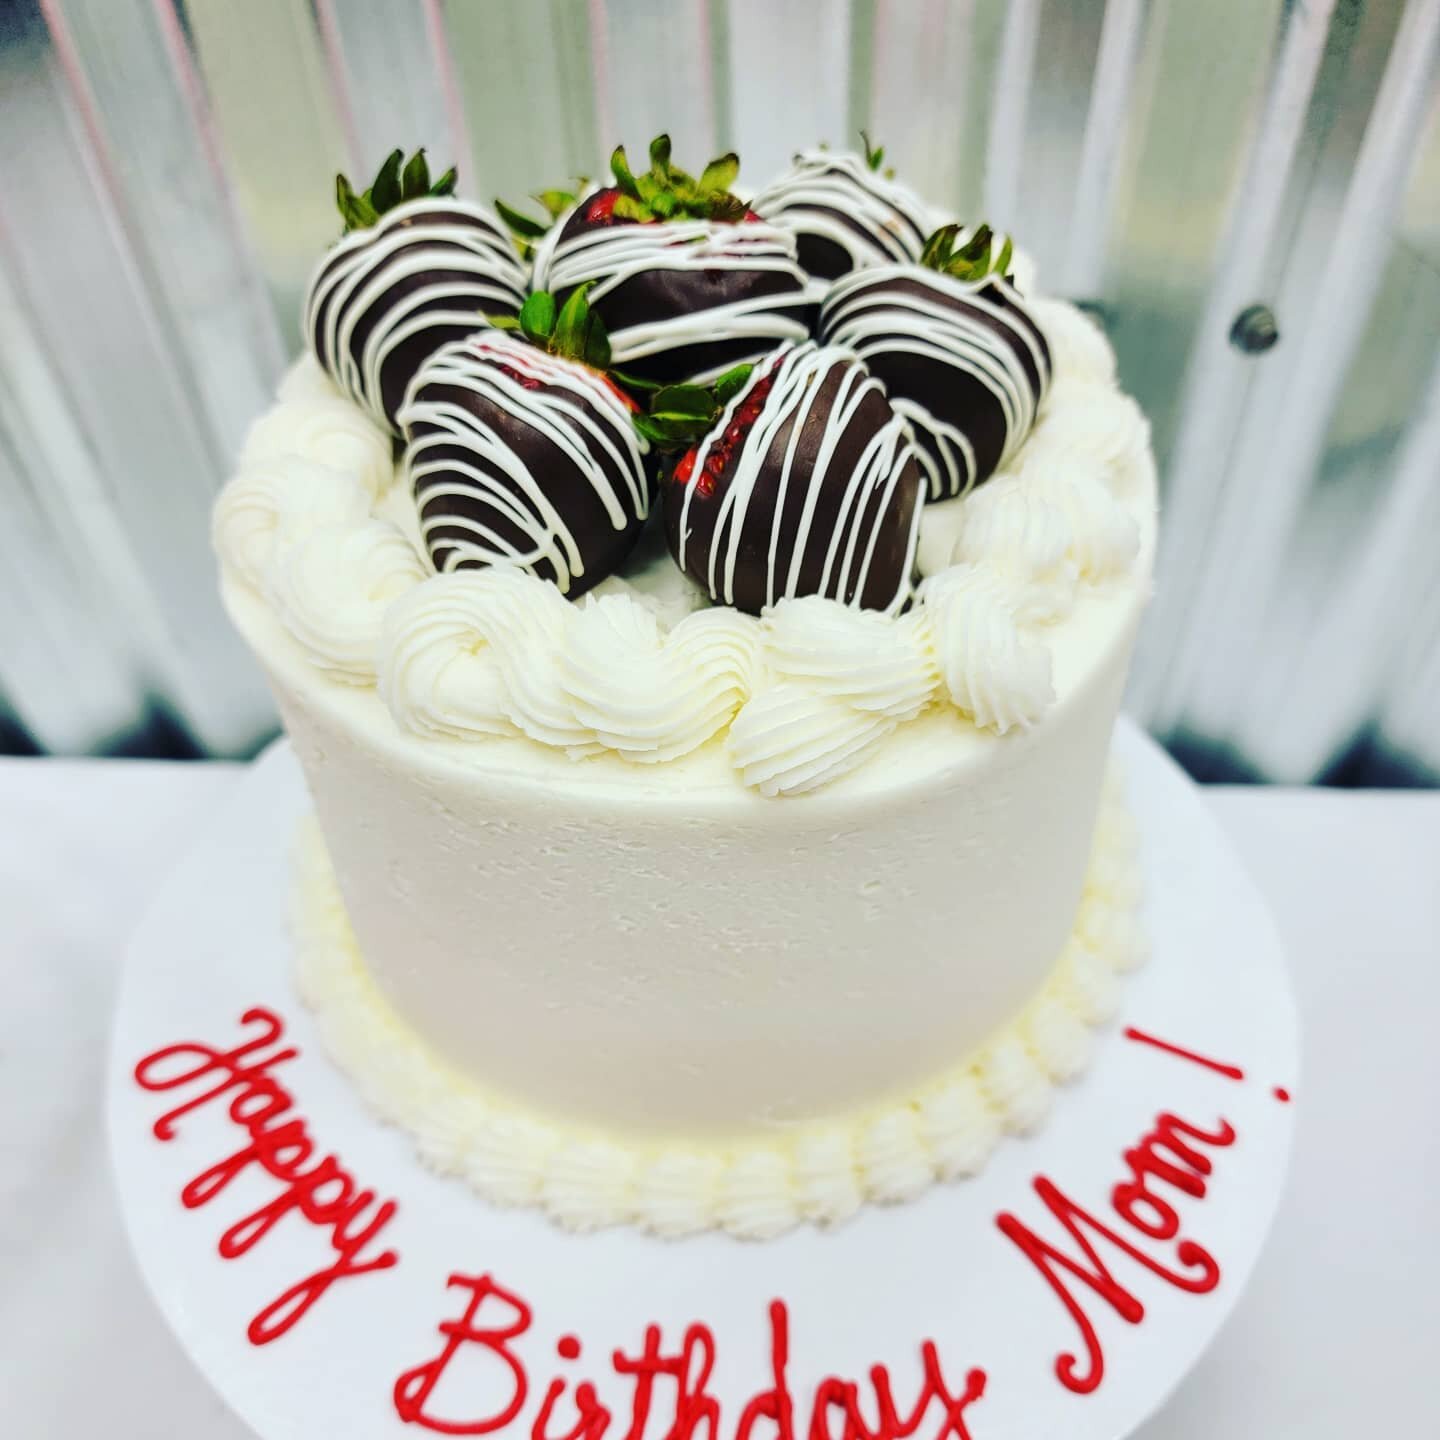 Chocolate covered strawberries go well with our cake!

#sweetnessinyourlife #bestcakeson30a #birthdaycakes #cakesofinstagram #seagroveplaza #southwalton #30alocalbusiness #madefromscratch #madewithlove #sweeton30a